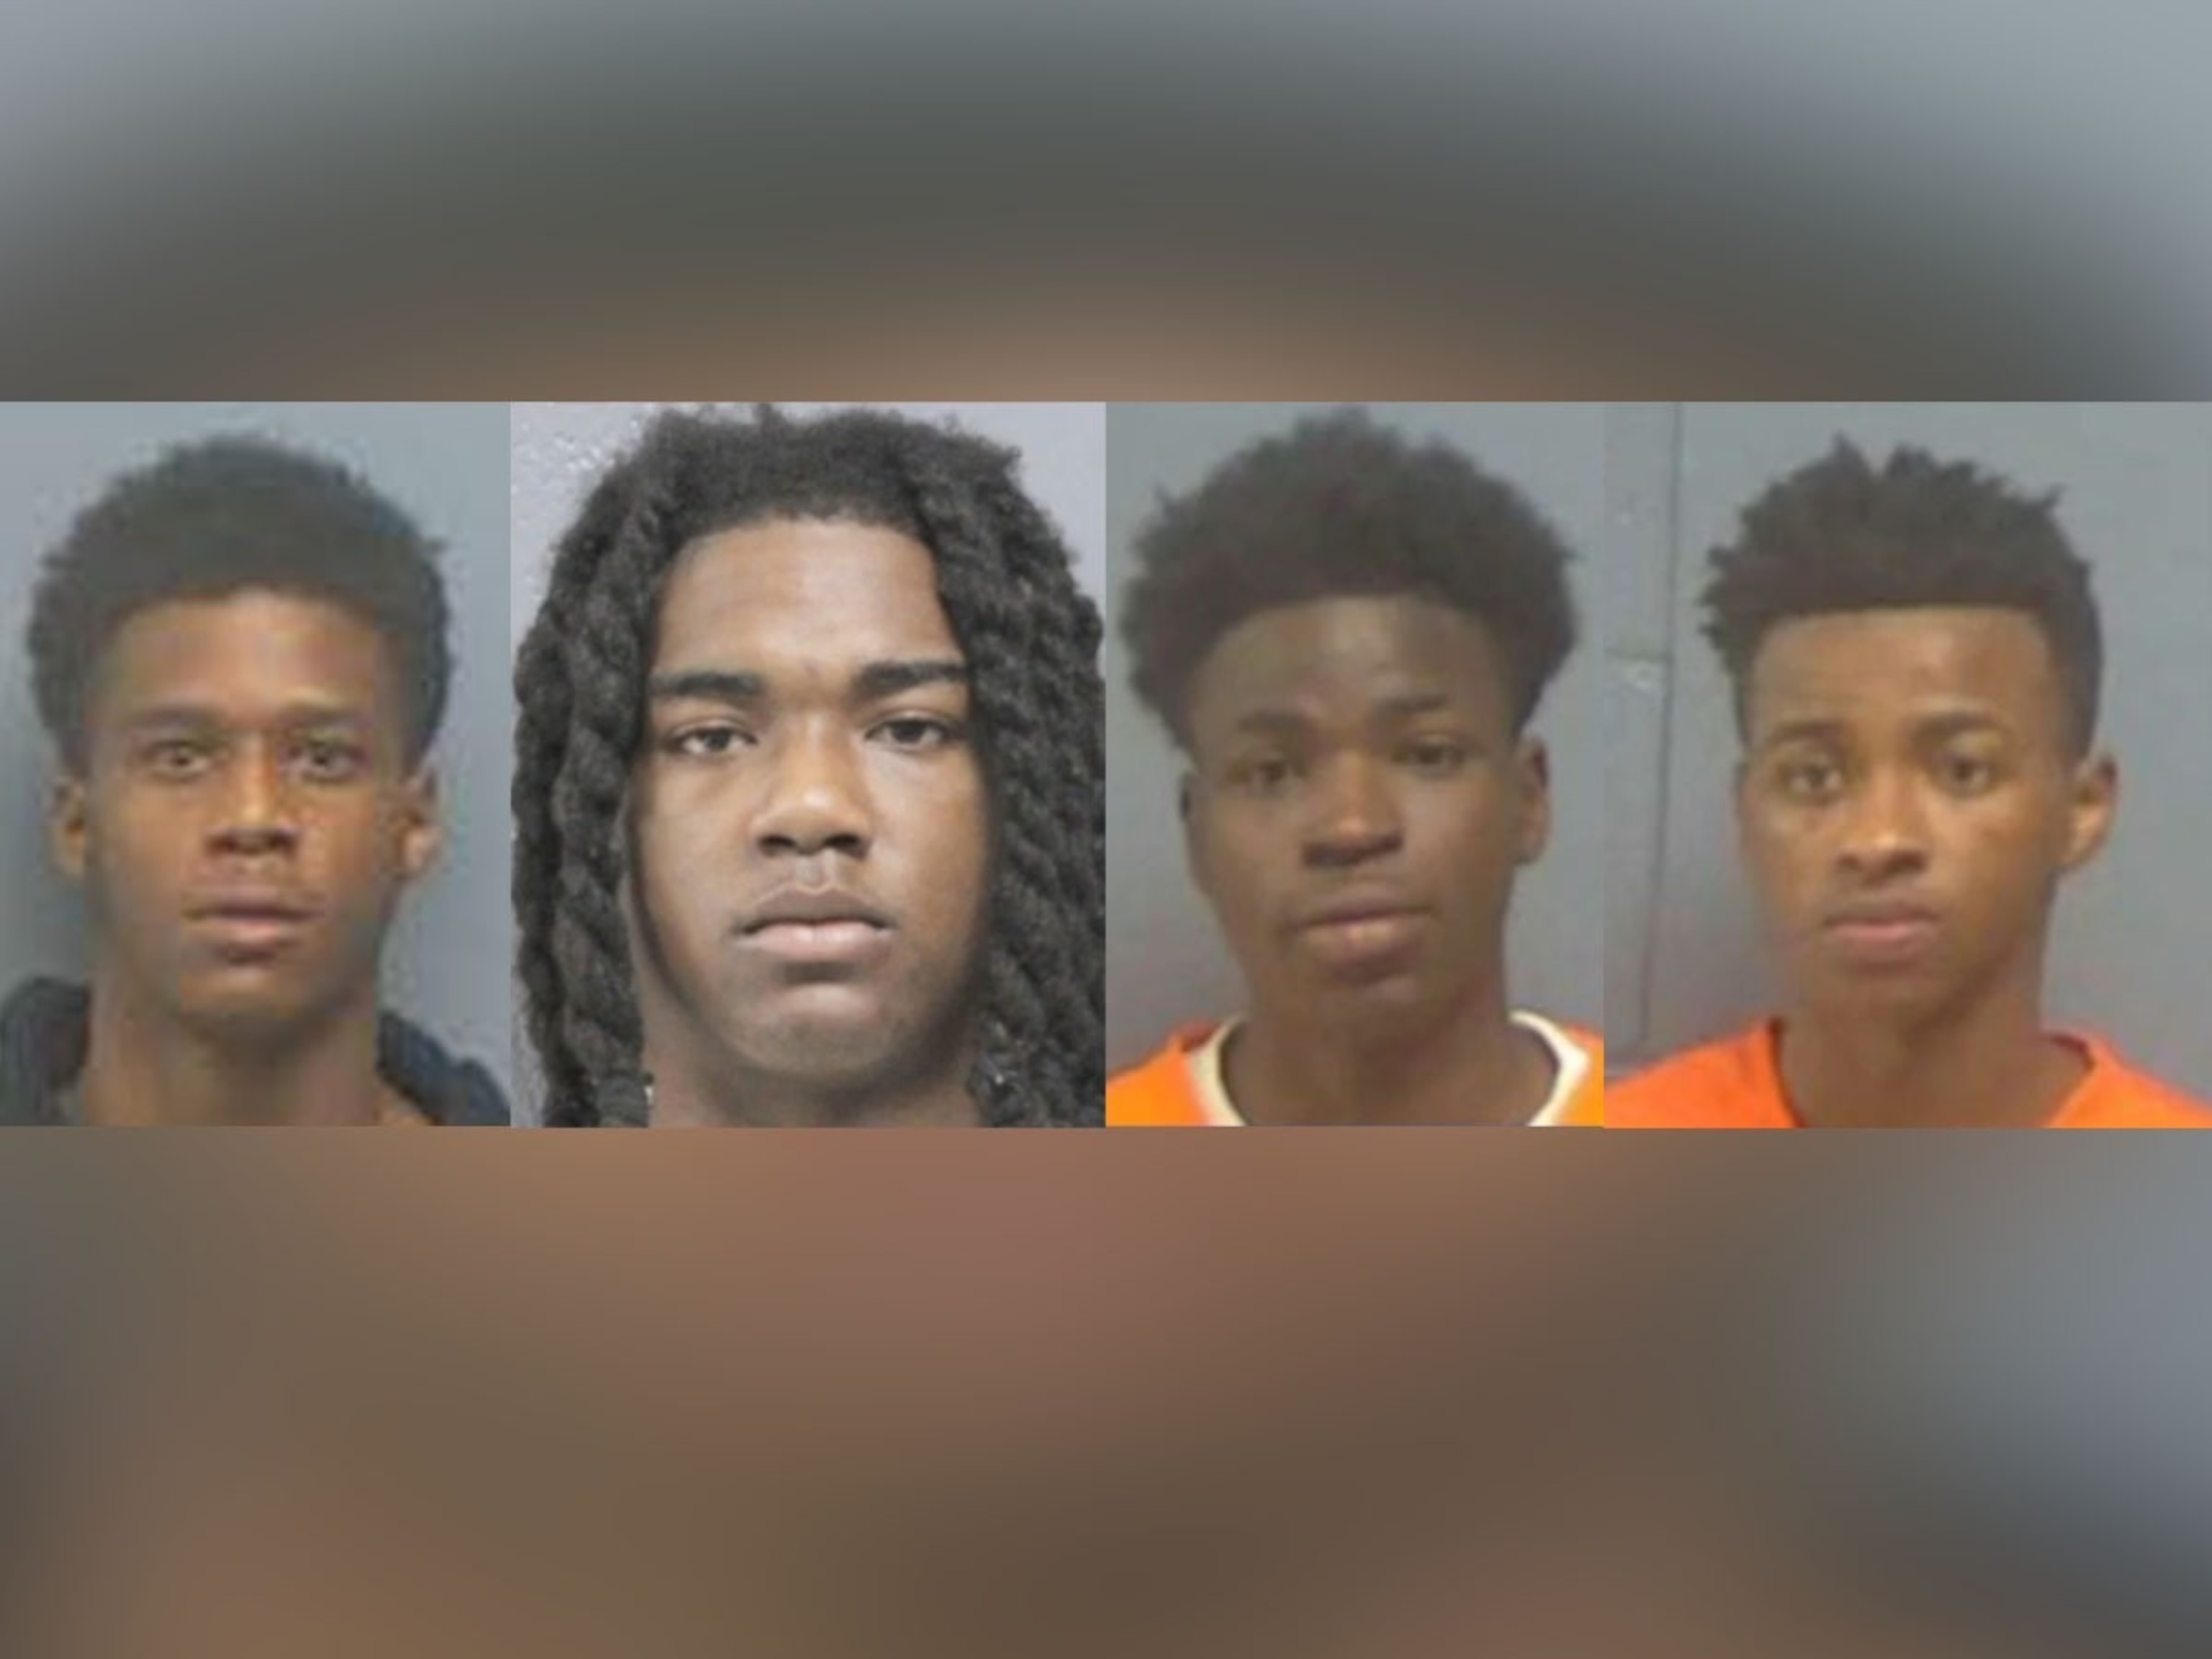 PHOTO: Omarion Hookfin, Jamarcus Cyprian, Travon Johnson and Avery Guidry in photos released by police. 